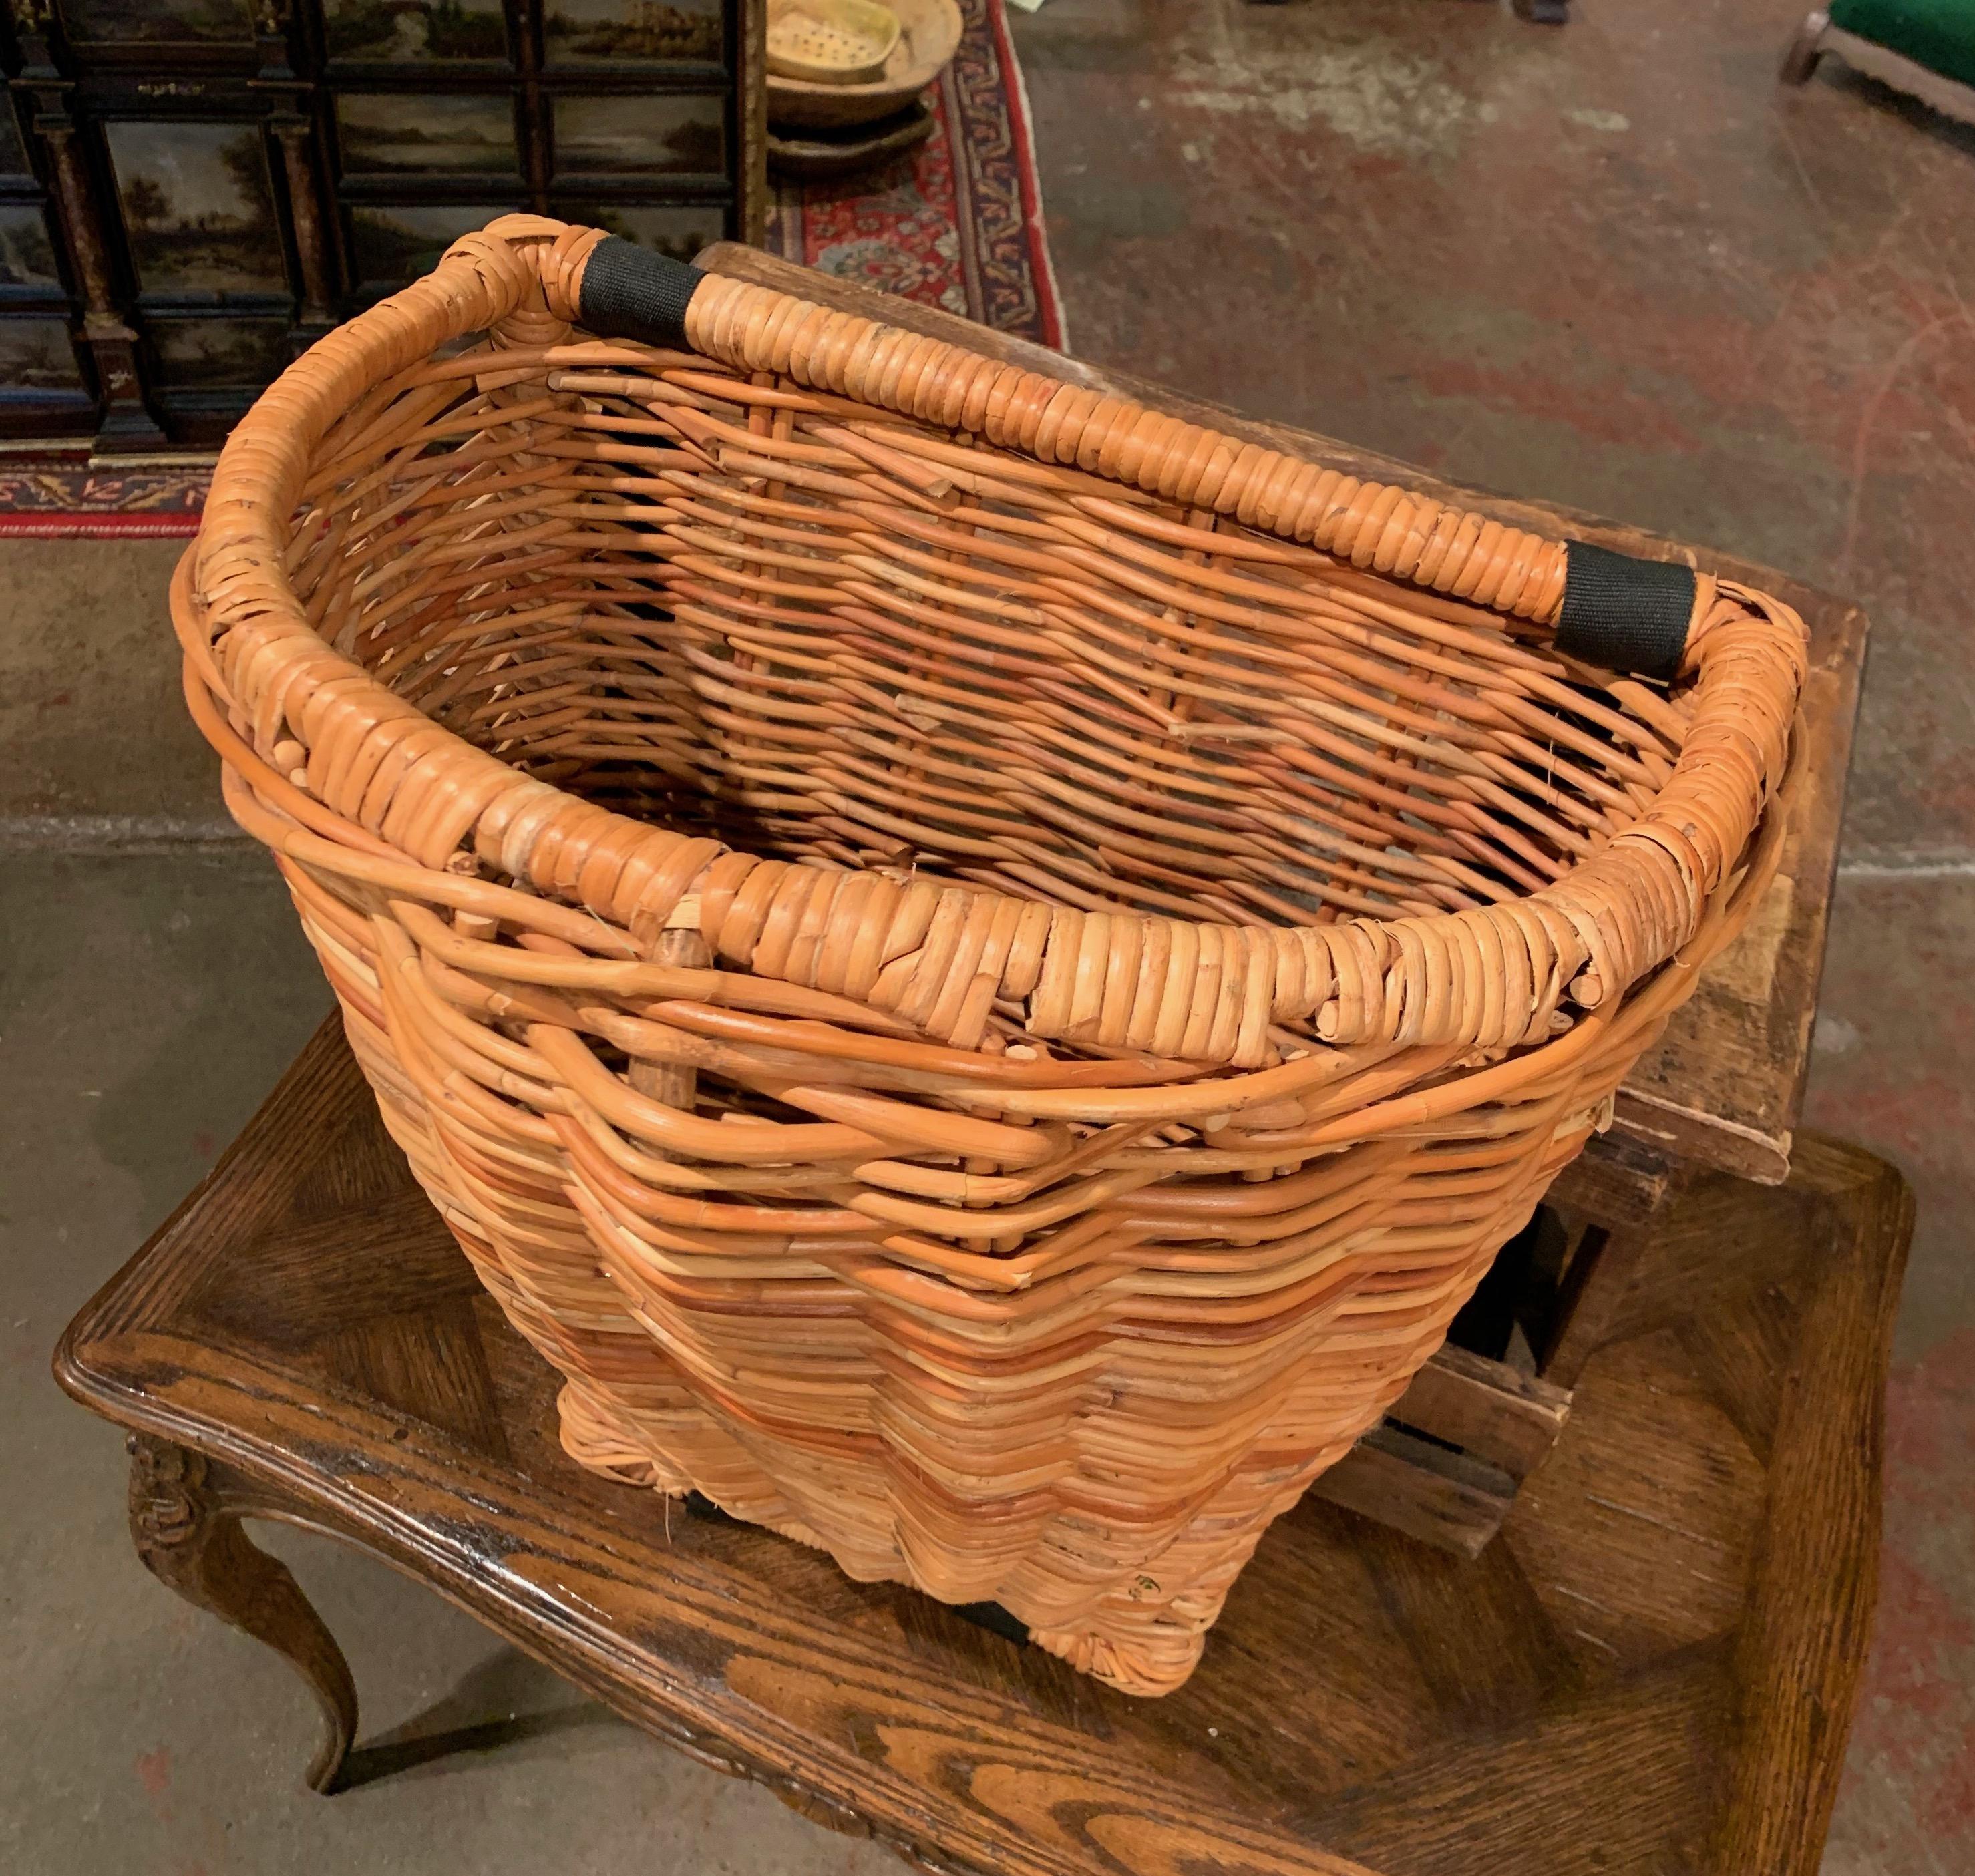 20th Century Midcentury French Handwoven Wicker Grape Basket from Burgundy with Straps